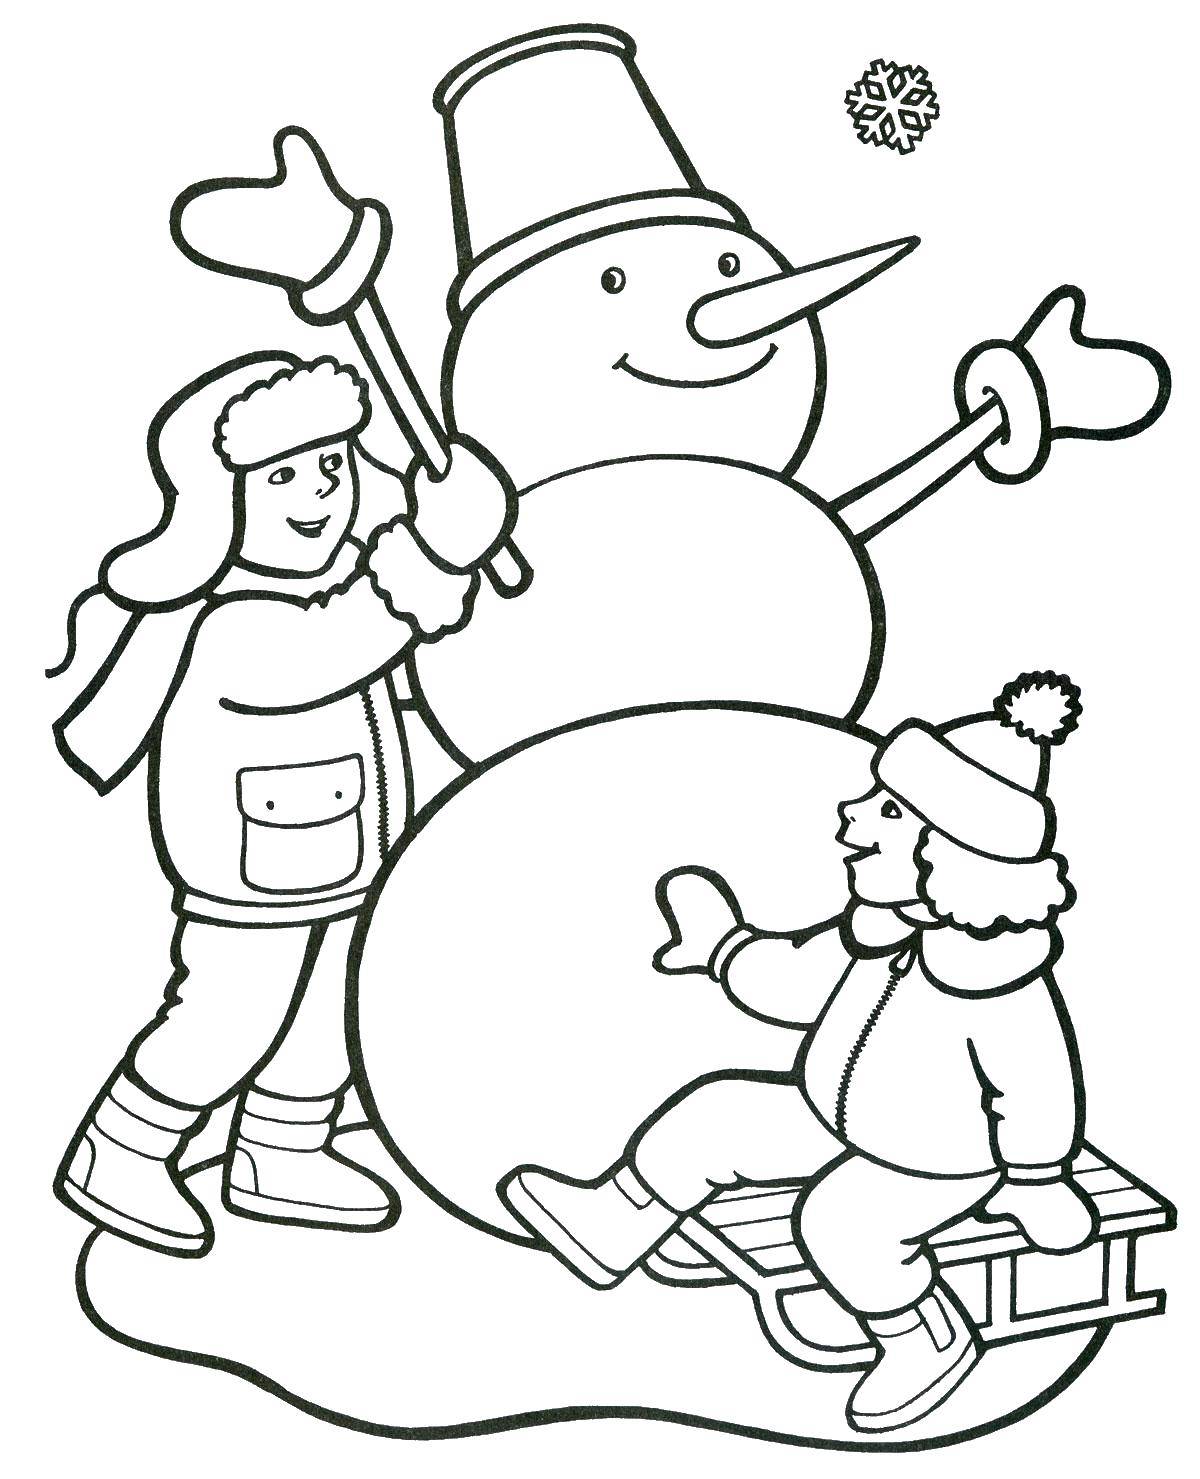 Coloring The boys make a snowman. Category winter. Tags:  boys, winter, snow, snowman.